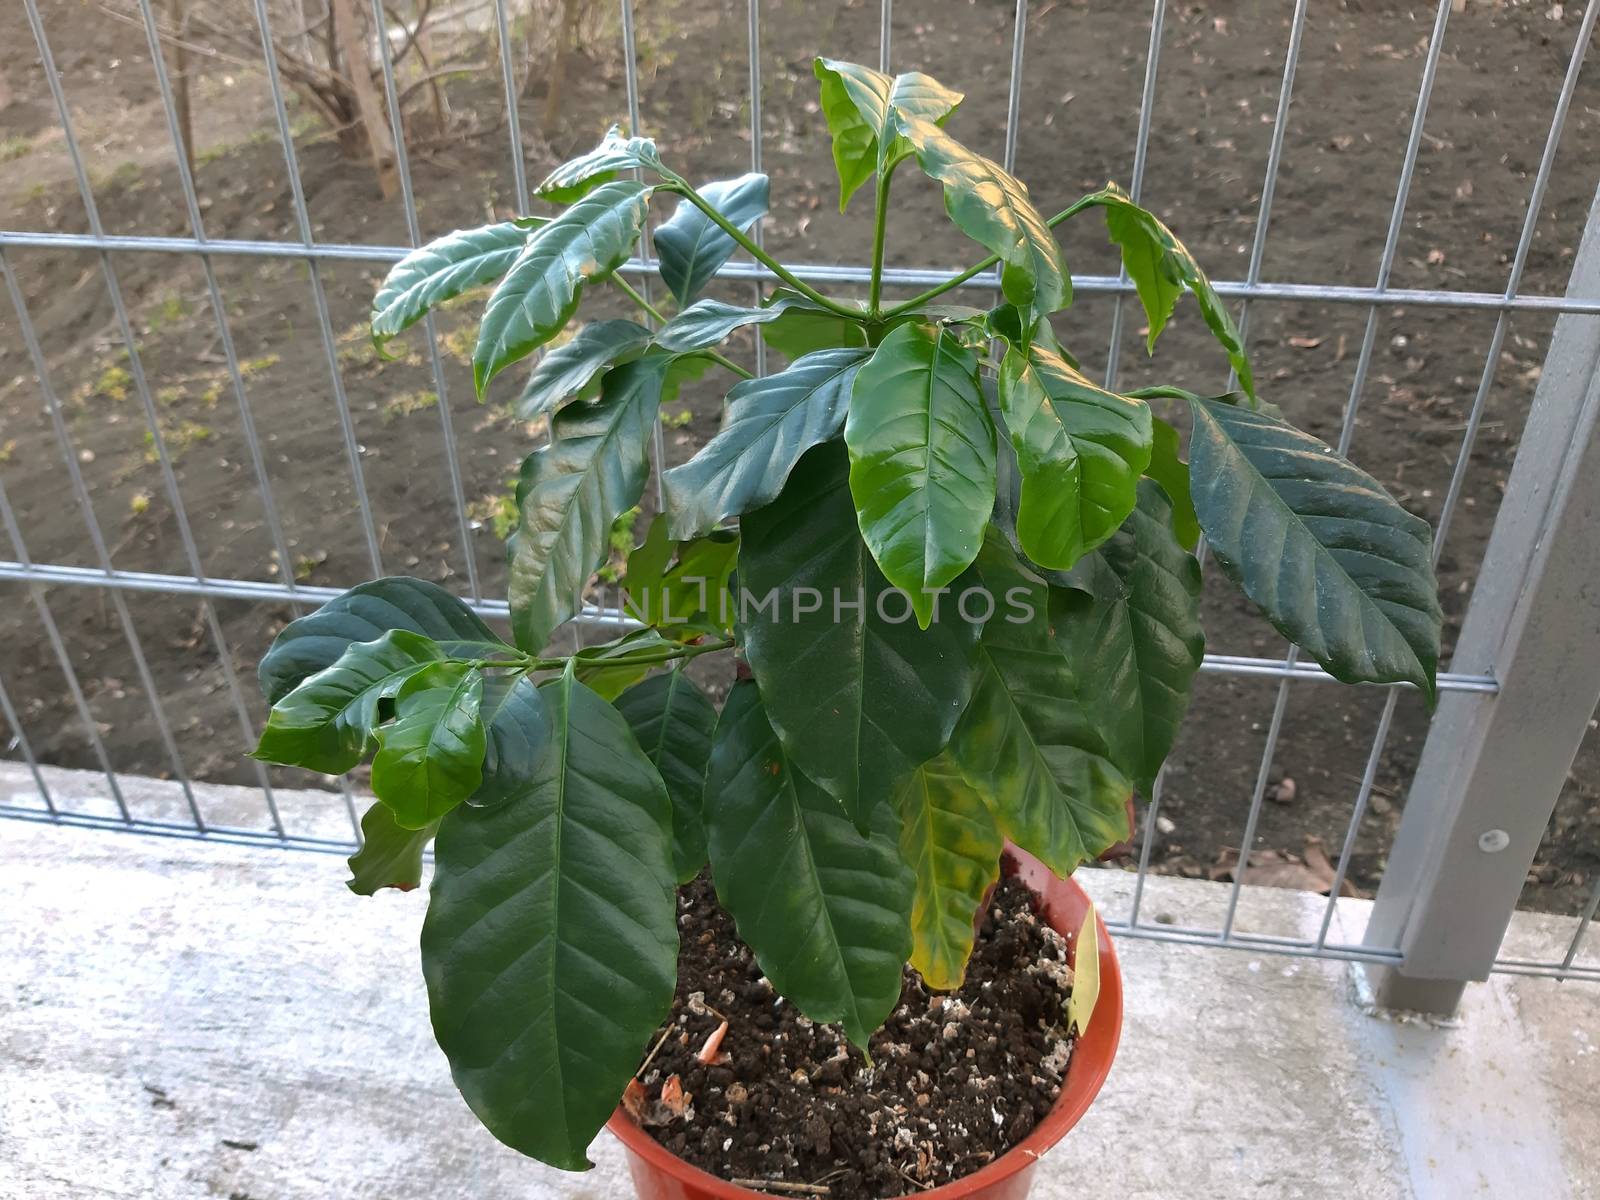 Coffee tree in a pot with many leaves.